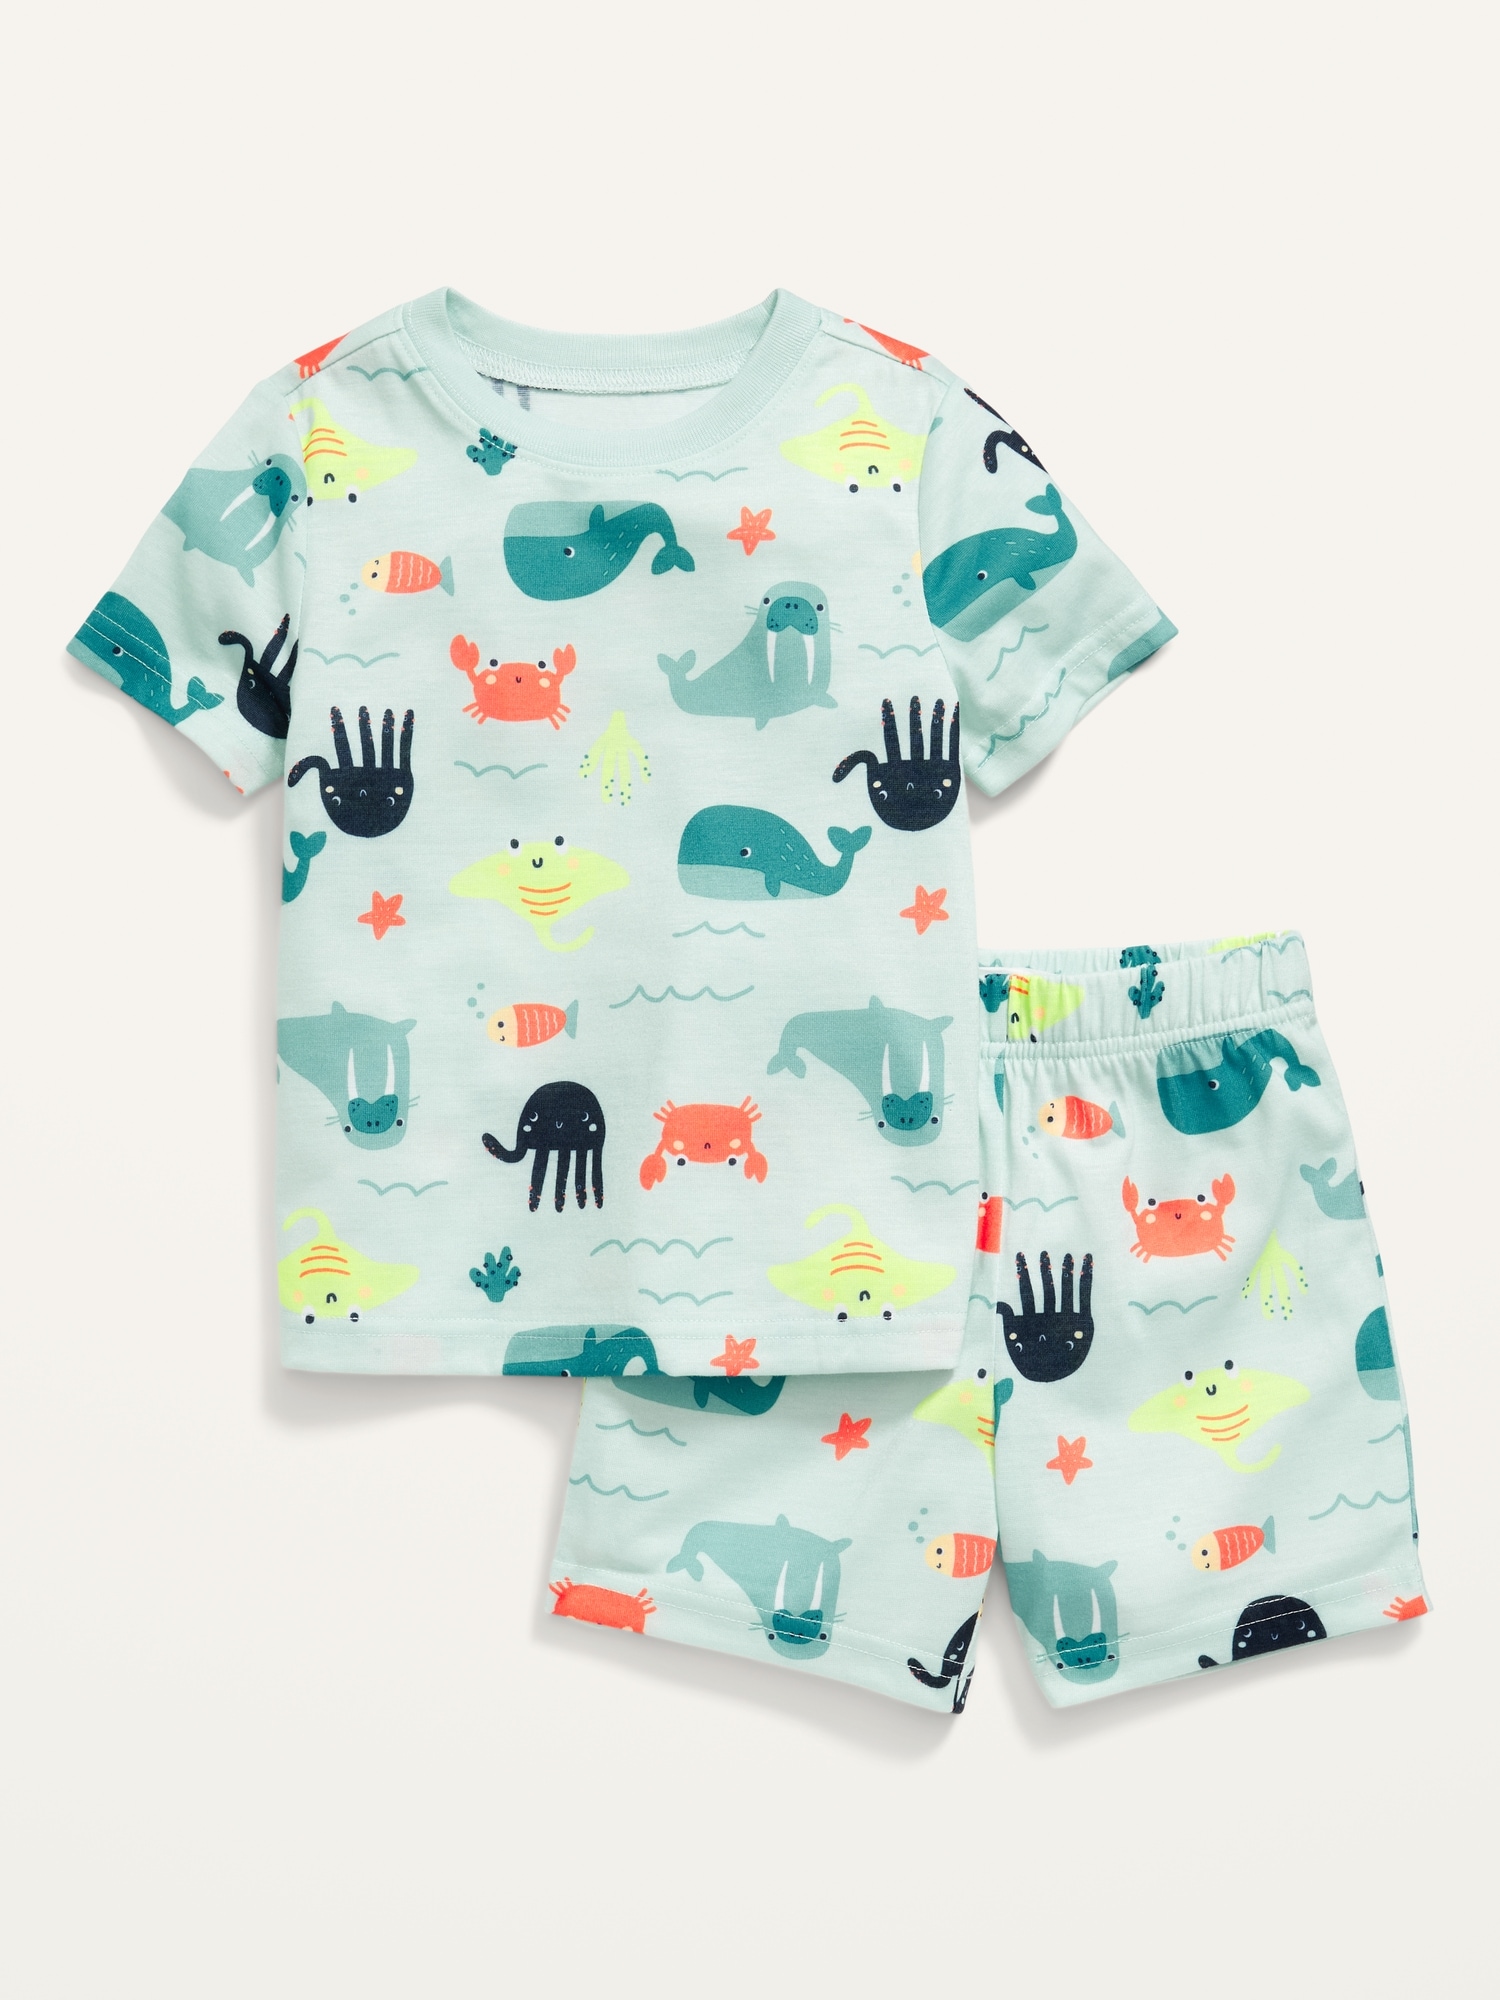 Unisex Loose-Fit Graphic Pajama Shorts Set for Toddler & Baby | Old Navy